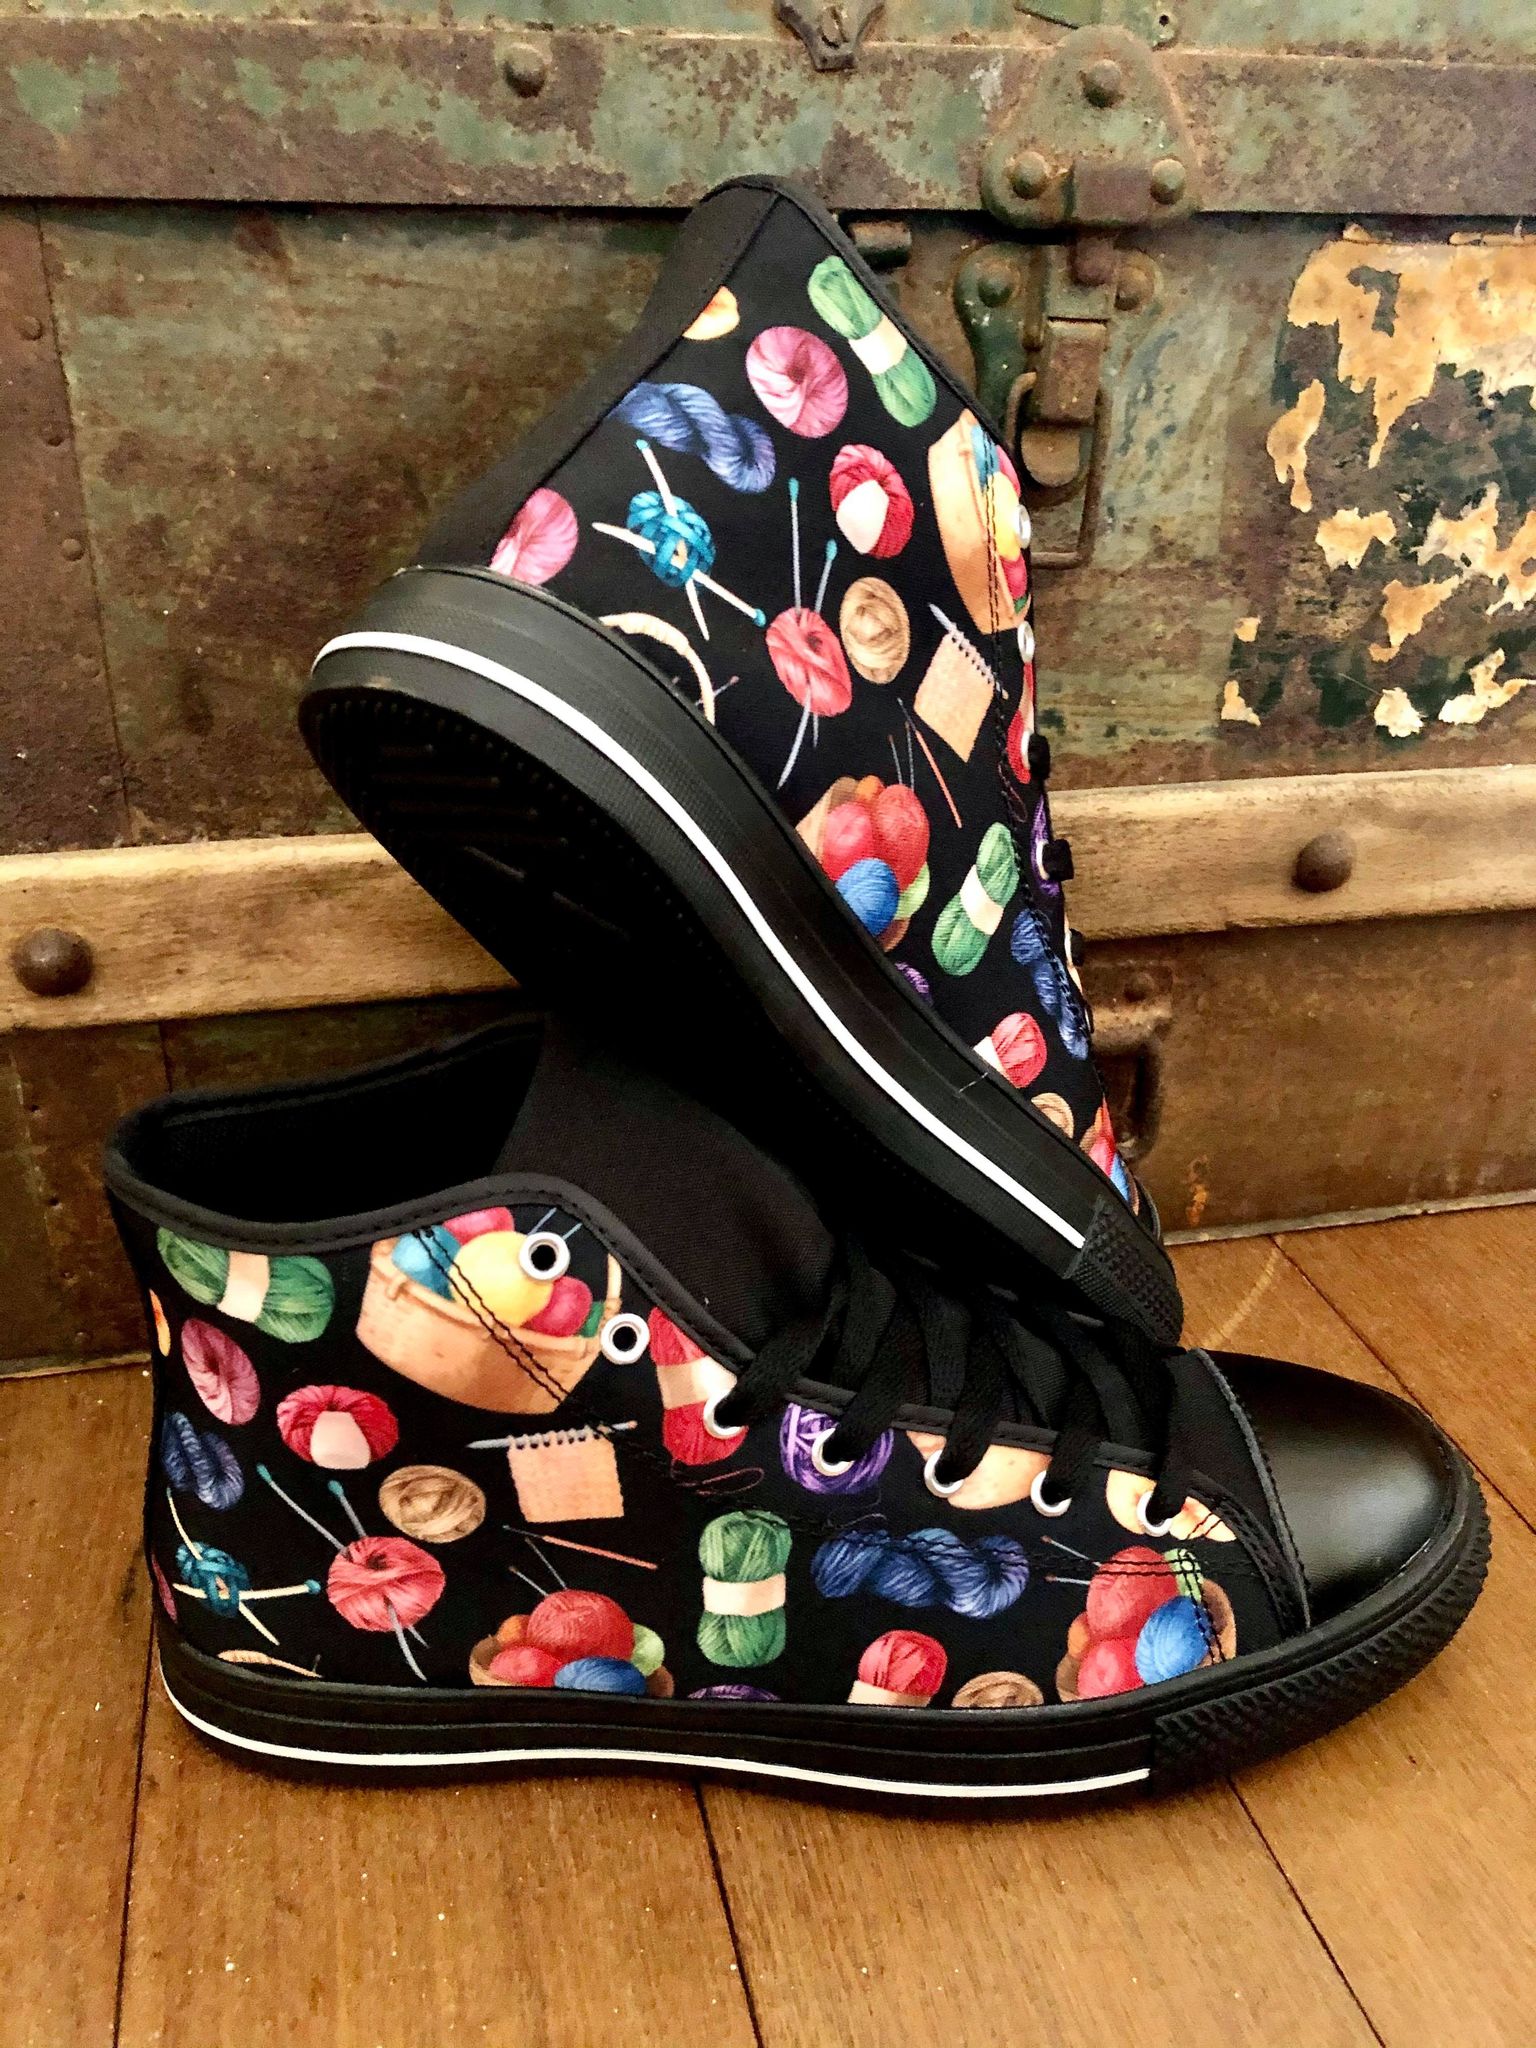 Yarn - High Top Shoes - Little Goody New Shoes Australia